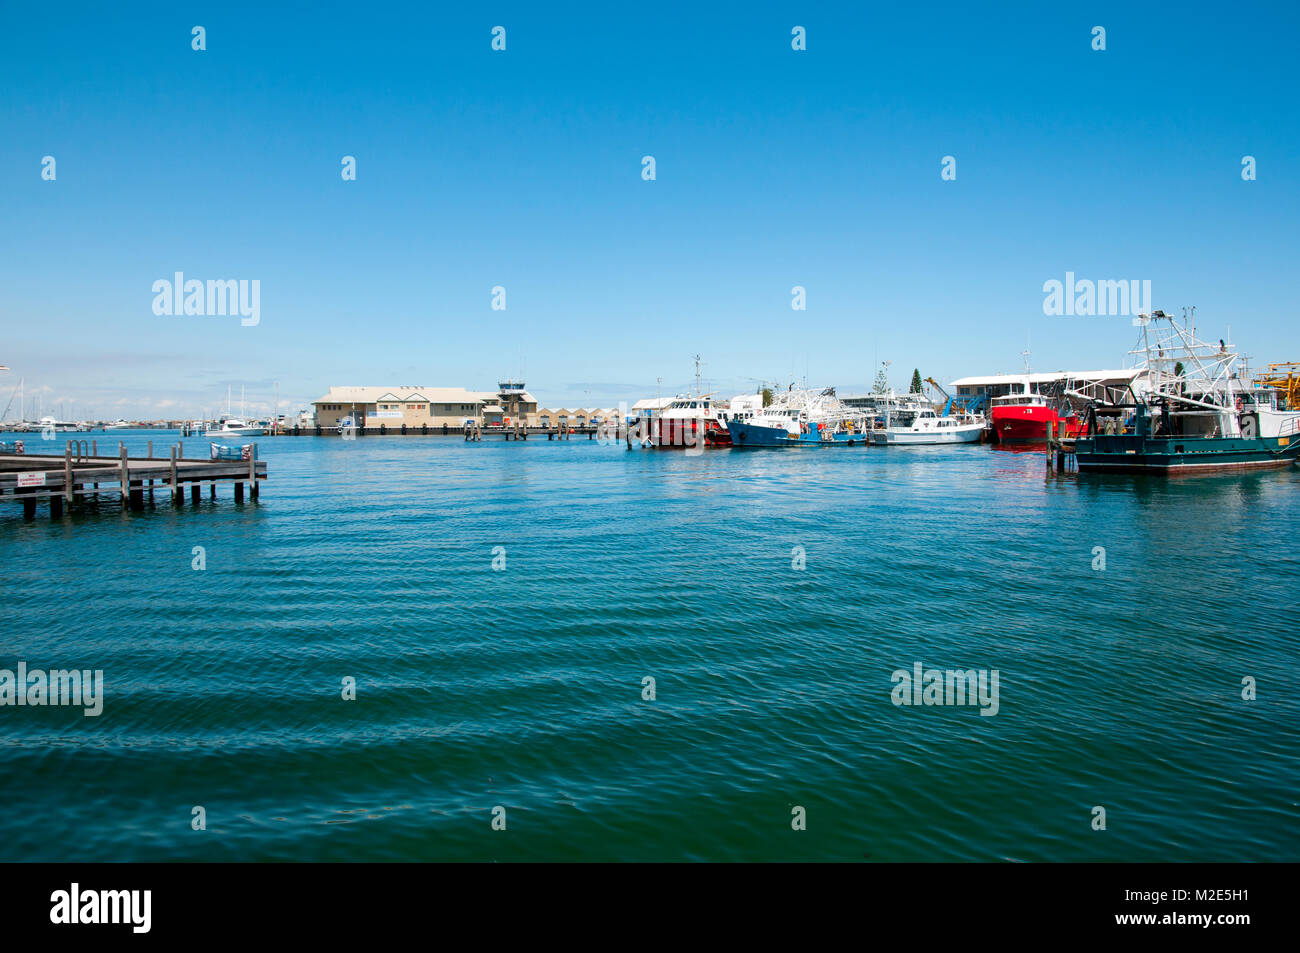 FREMANTLE, AUSTRALIA - October 26, 2016: Commercial boats in the Fremantle Waterfront Stock Photo